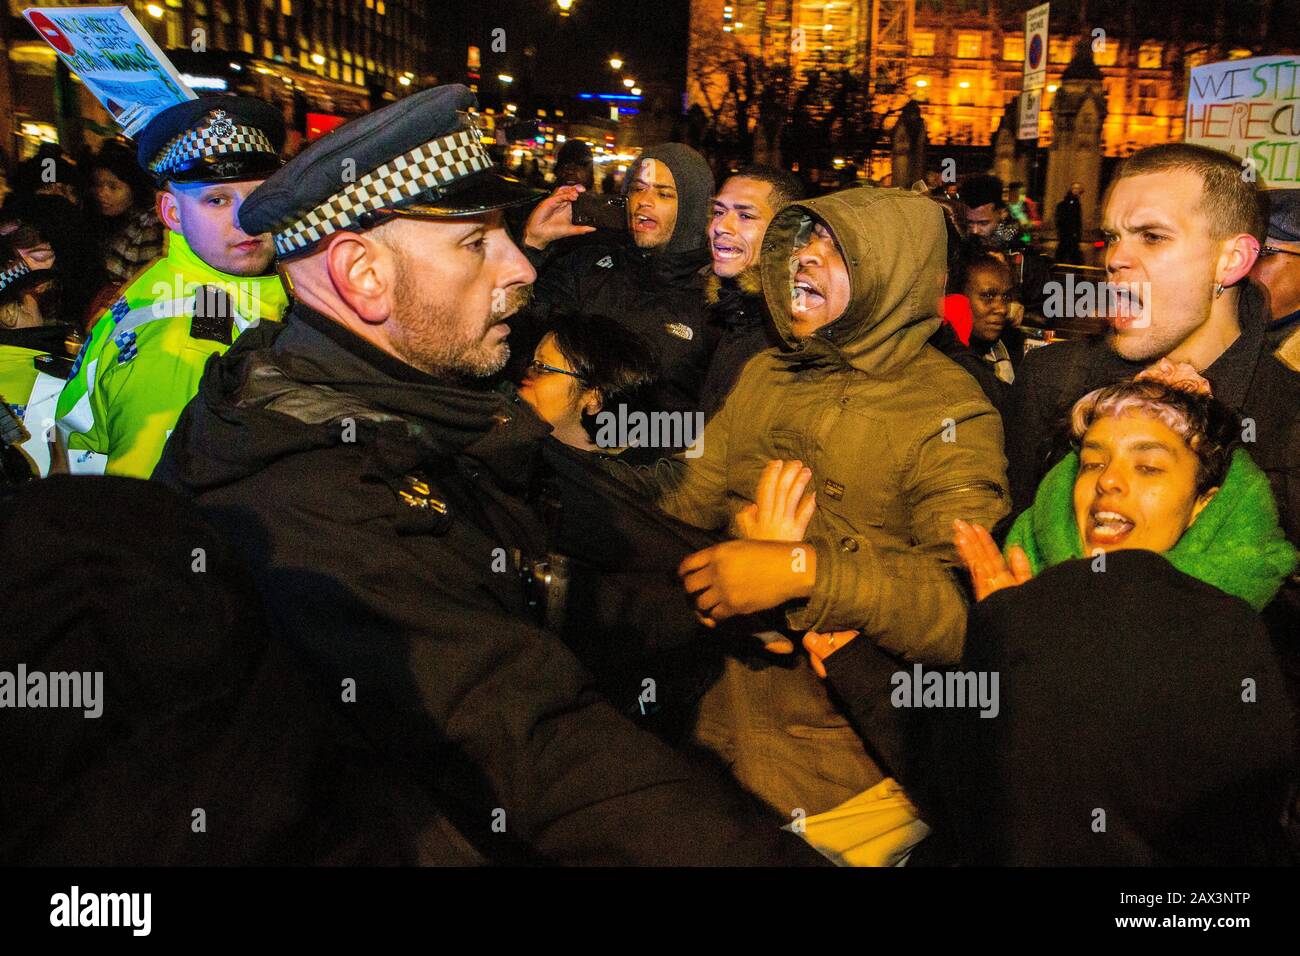 London UK 1Oth Feb 2020 Police clash with protesters outside the houses of parliament during demonstration against deportation of 50 people on a Home Office charter flight to Jamaica. Credit: Thabo Jaiyesimi/Alamy Live News Stock Photo